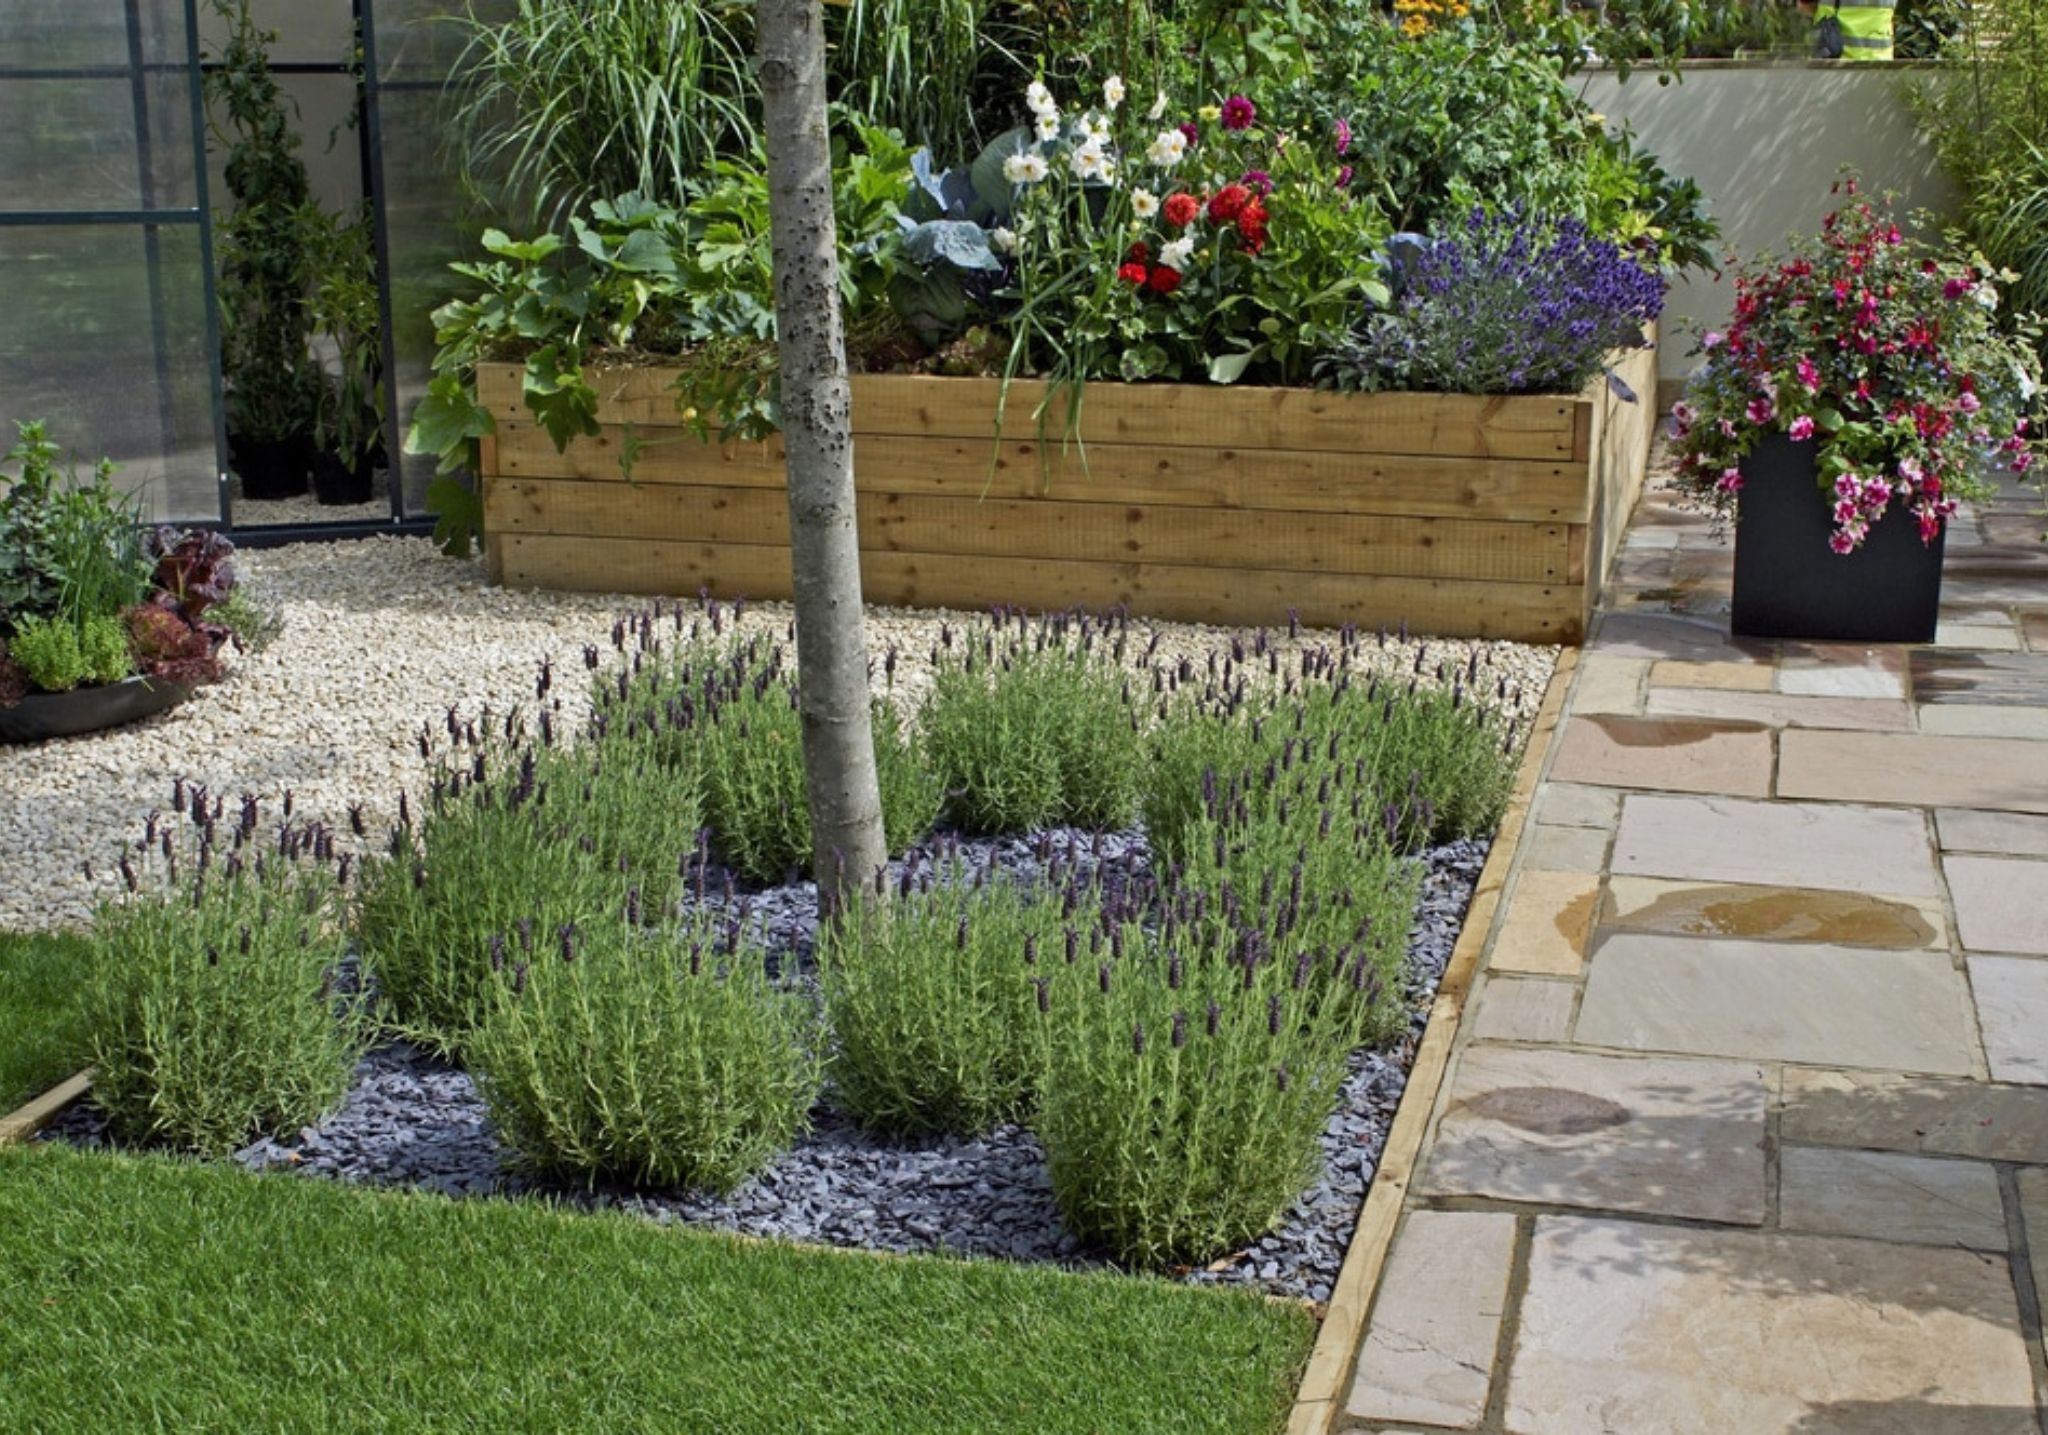 Terrace garden with raised beds and containers